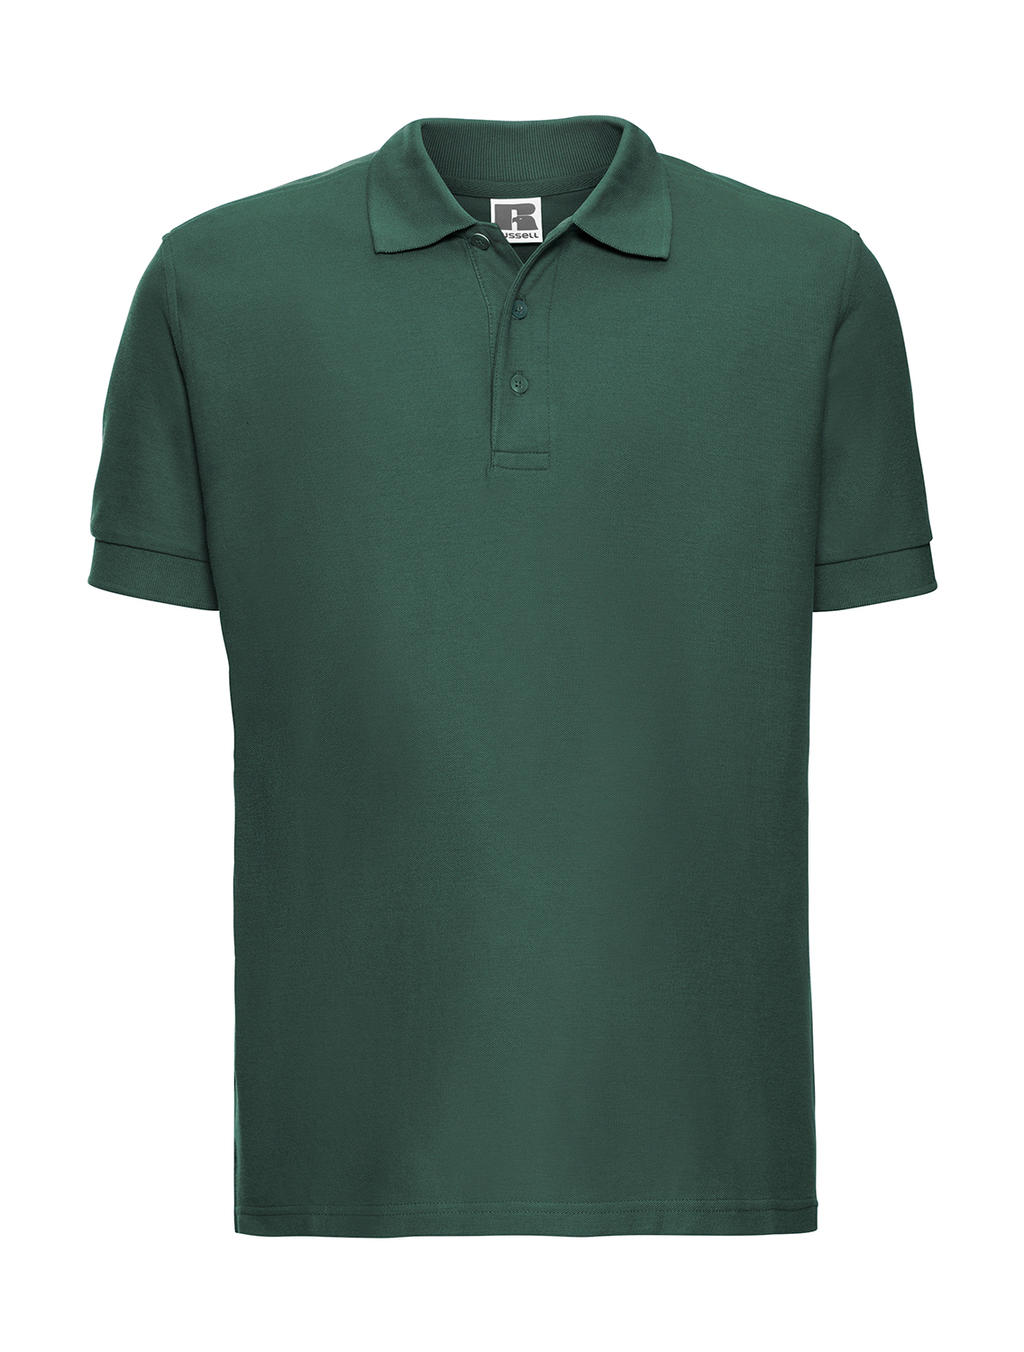  Mens Ultimate Cotton Polo in Farbe Bottle Green